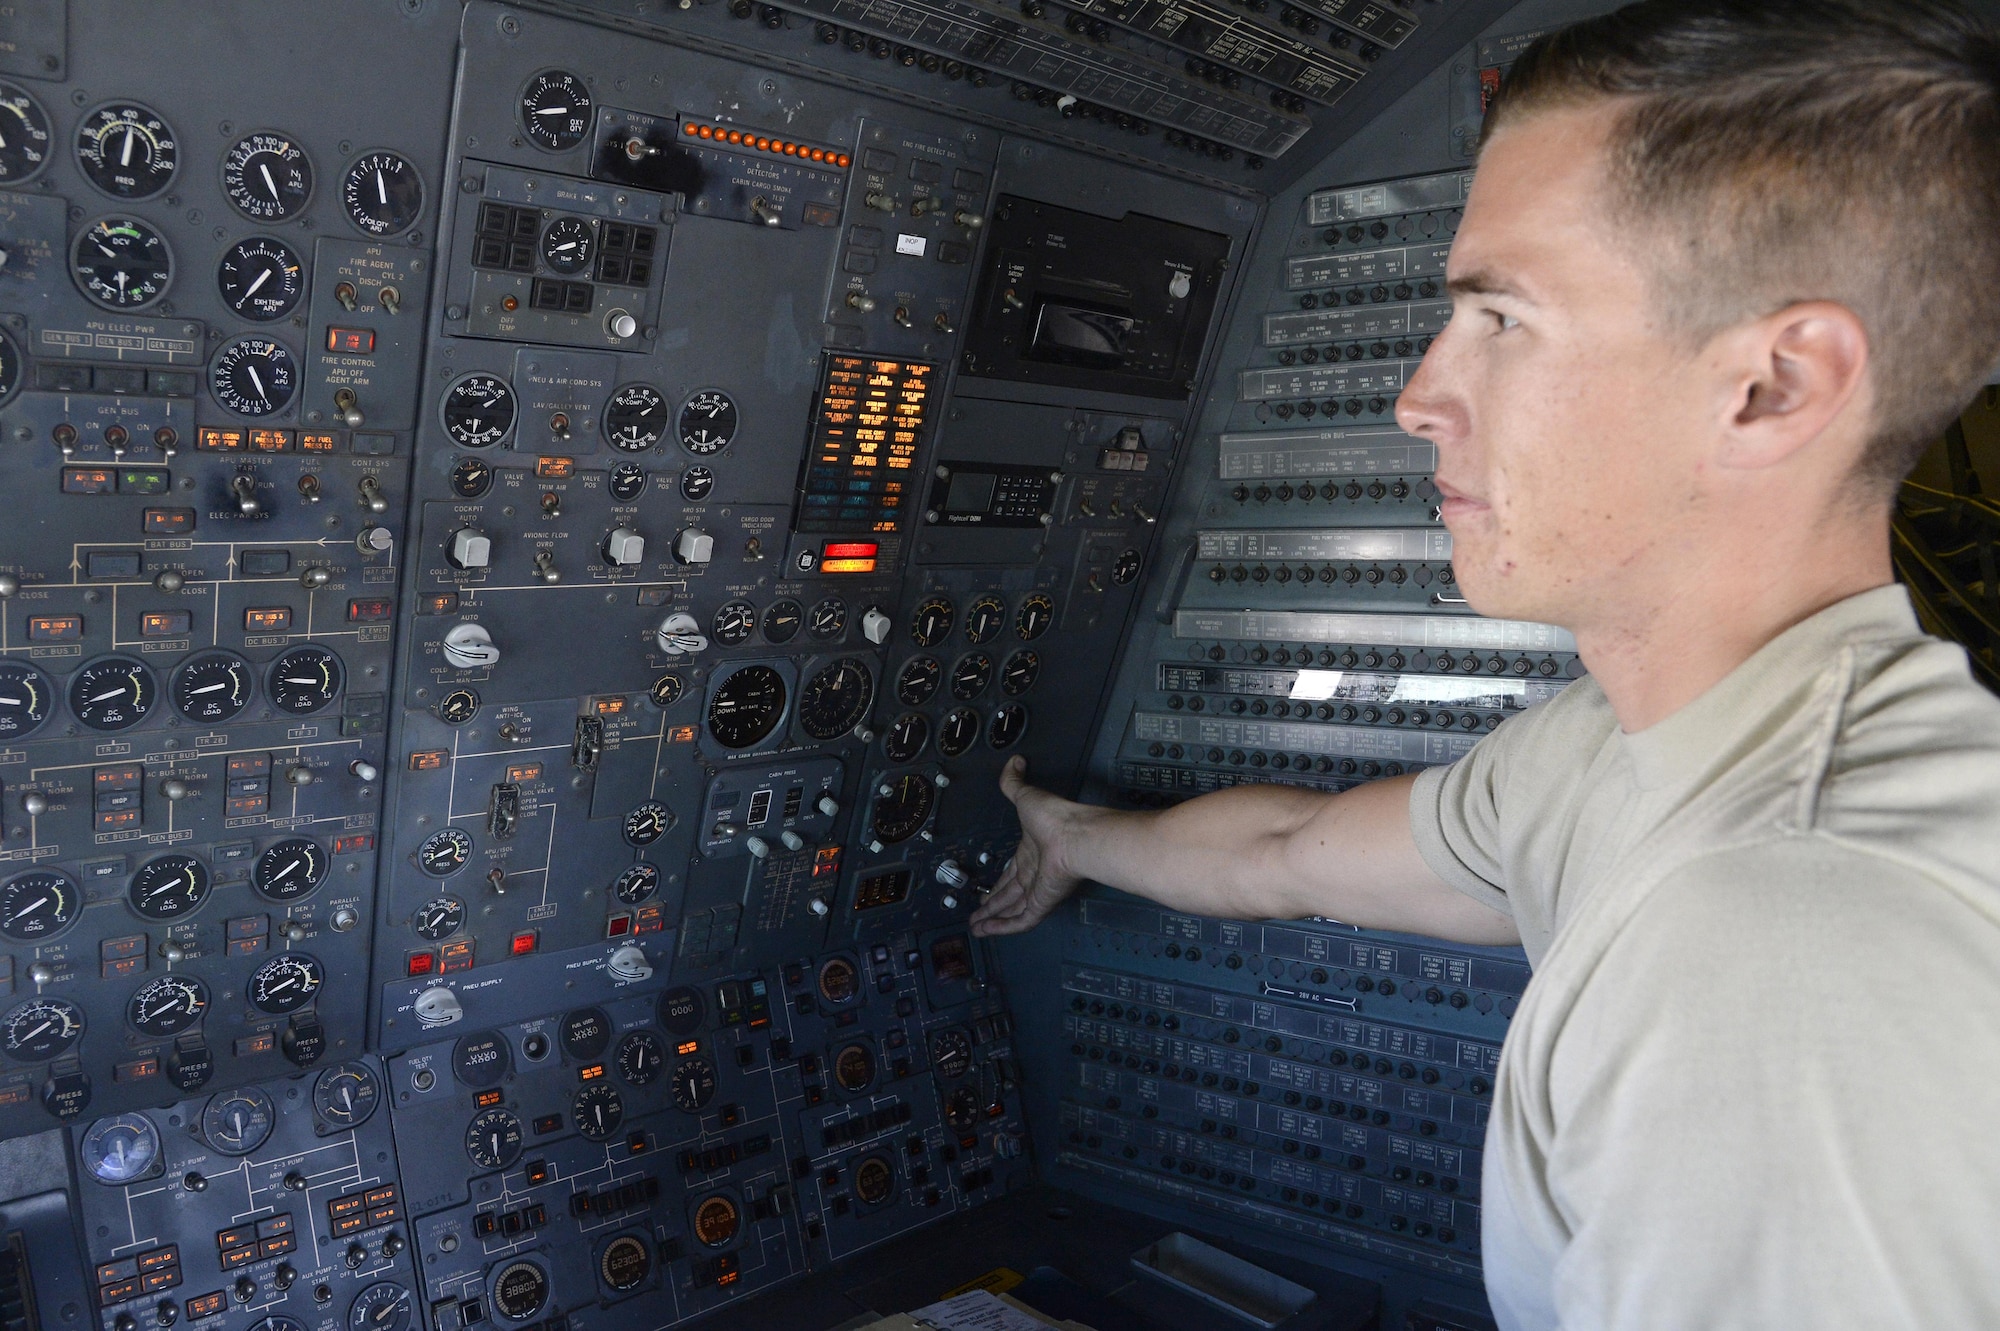 Airman 1st Class Taylor, KC-10 Extender crew chief, performs a preflight inspection aboard a KC-10 Extender at an undisclosed location in Southwest Asia Feb. 2, 2015.  Although the KC-l0 Extender’s primary mission is aerial refueling, it can combine the tasks of a tanker and cargo aircraft by refueling fighters and simultaneously carry the fighter support personnel and equipment on overseas deployments. Taylor is currently deployed from Travis Air Force Base, Calif., and is a native of Belleview, S.D. (U.S. Air Force photo/Tech. Sgt. Marie Brown)